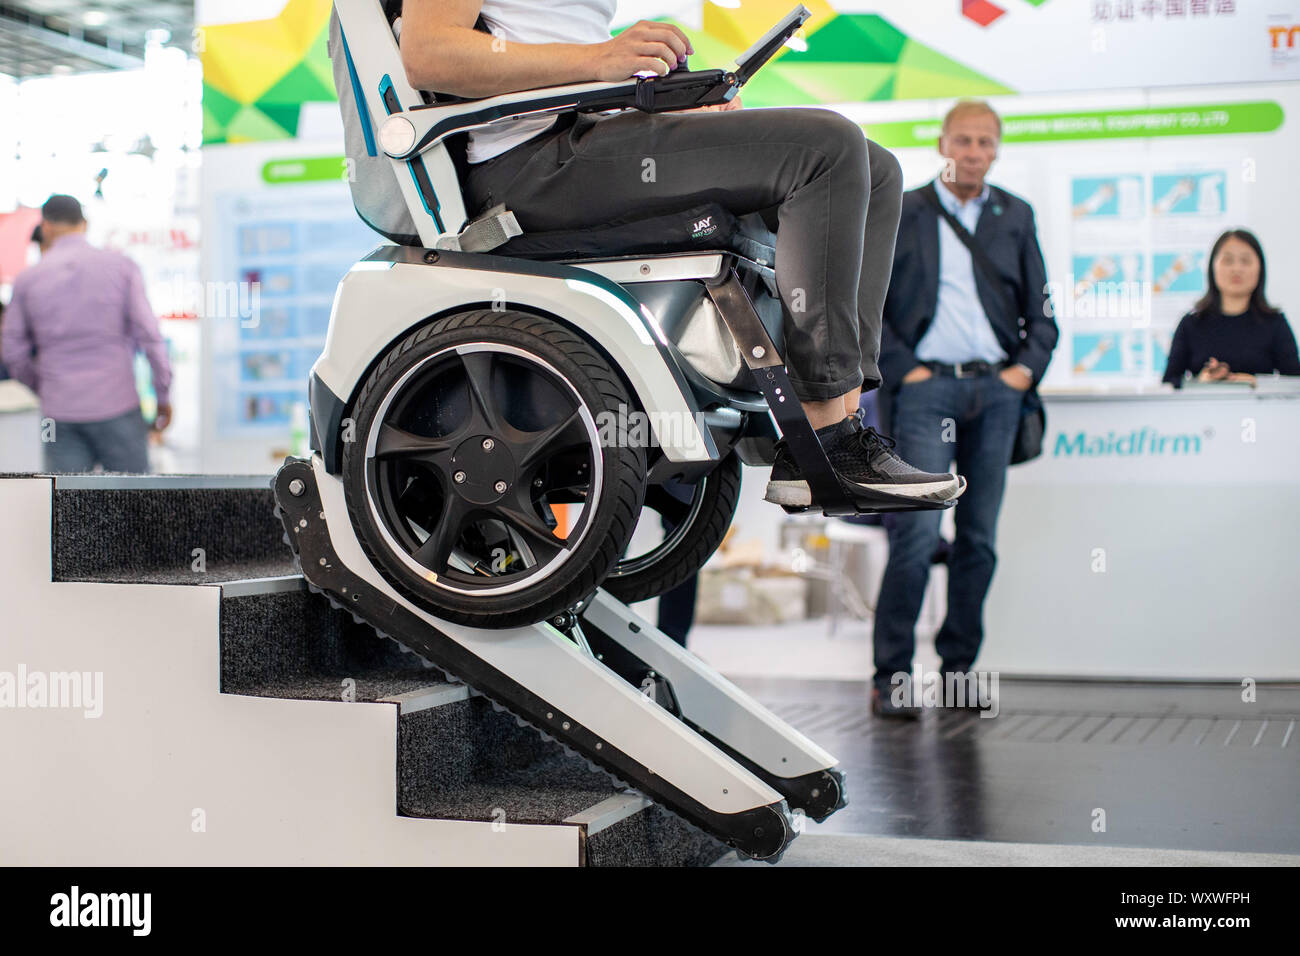 Duesseldorf, Germany. 18th Sep, 2019. The electric wheelchair Scewo Bro  drives up a staircase during a demonstration. According to the exhibitor,  the Scewo Bro power wheelchair is the only wheelchair in the